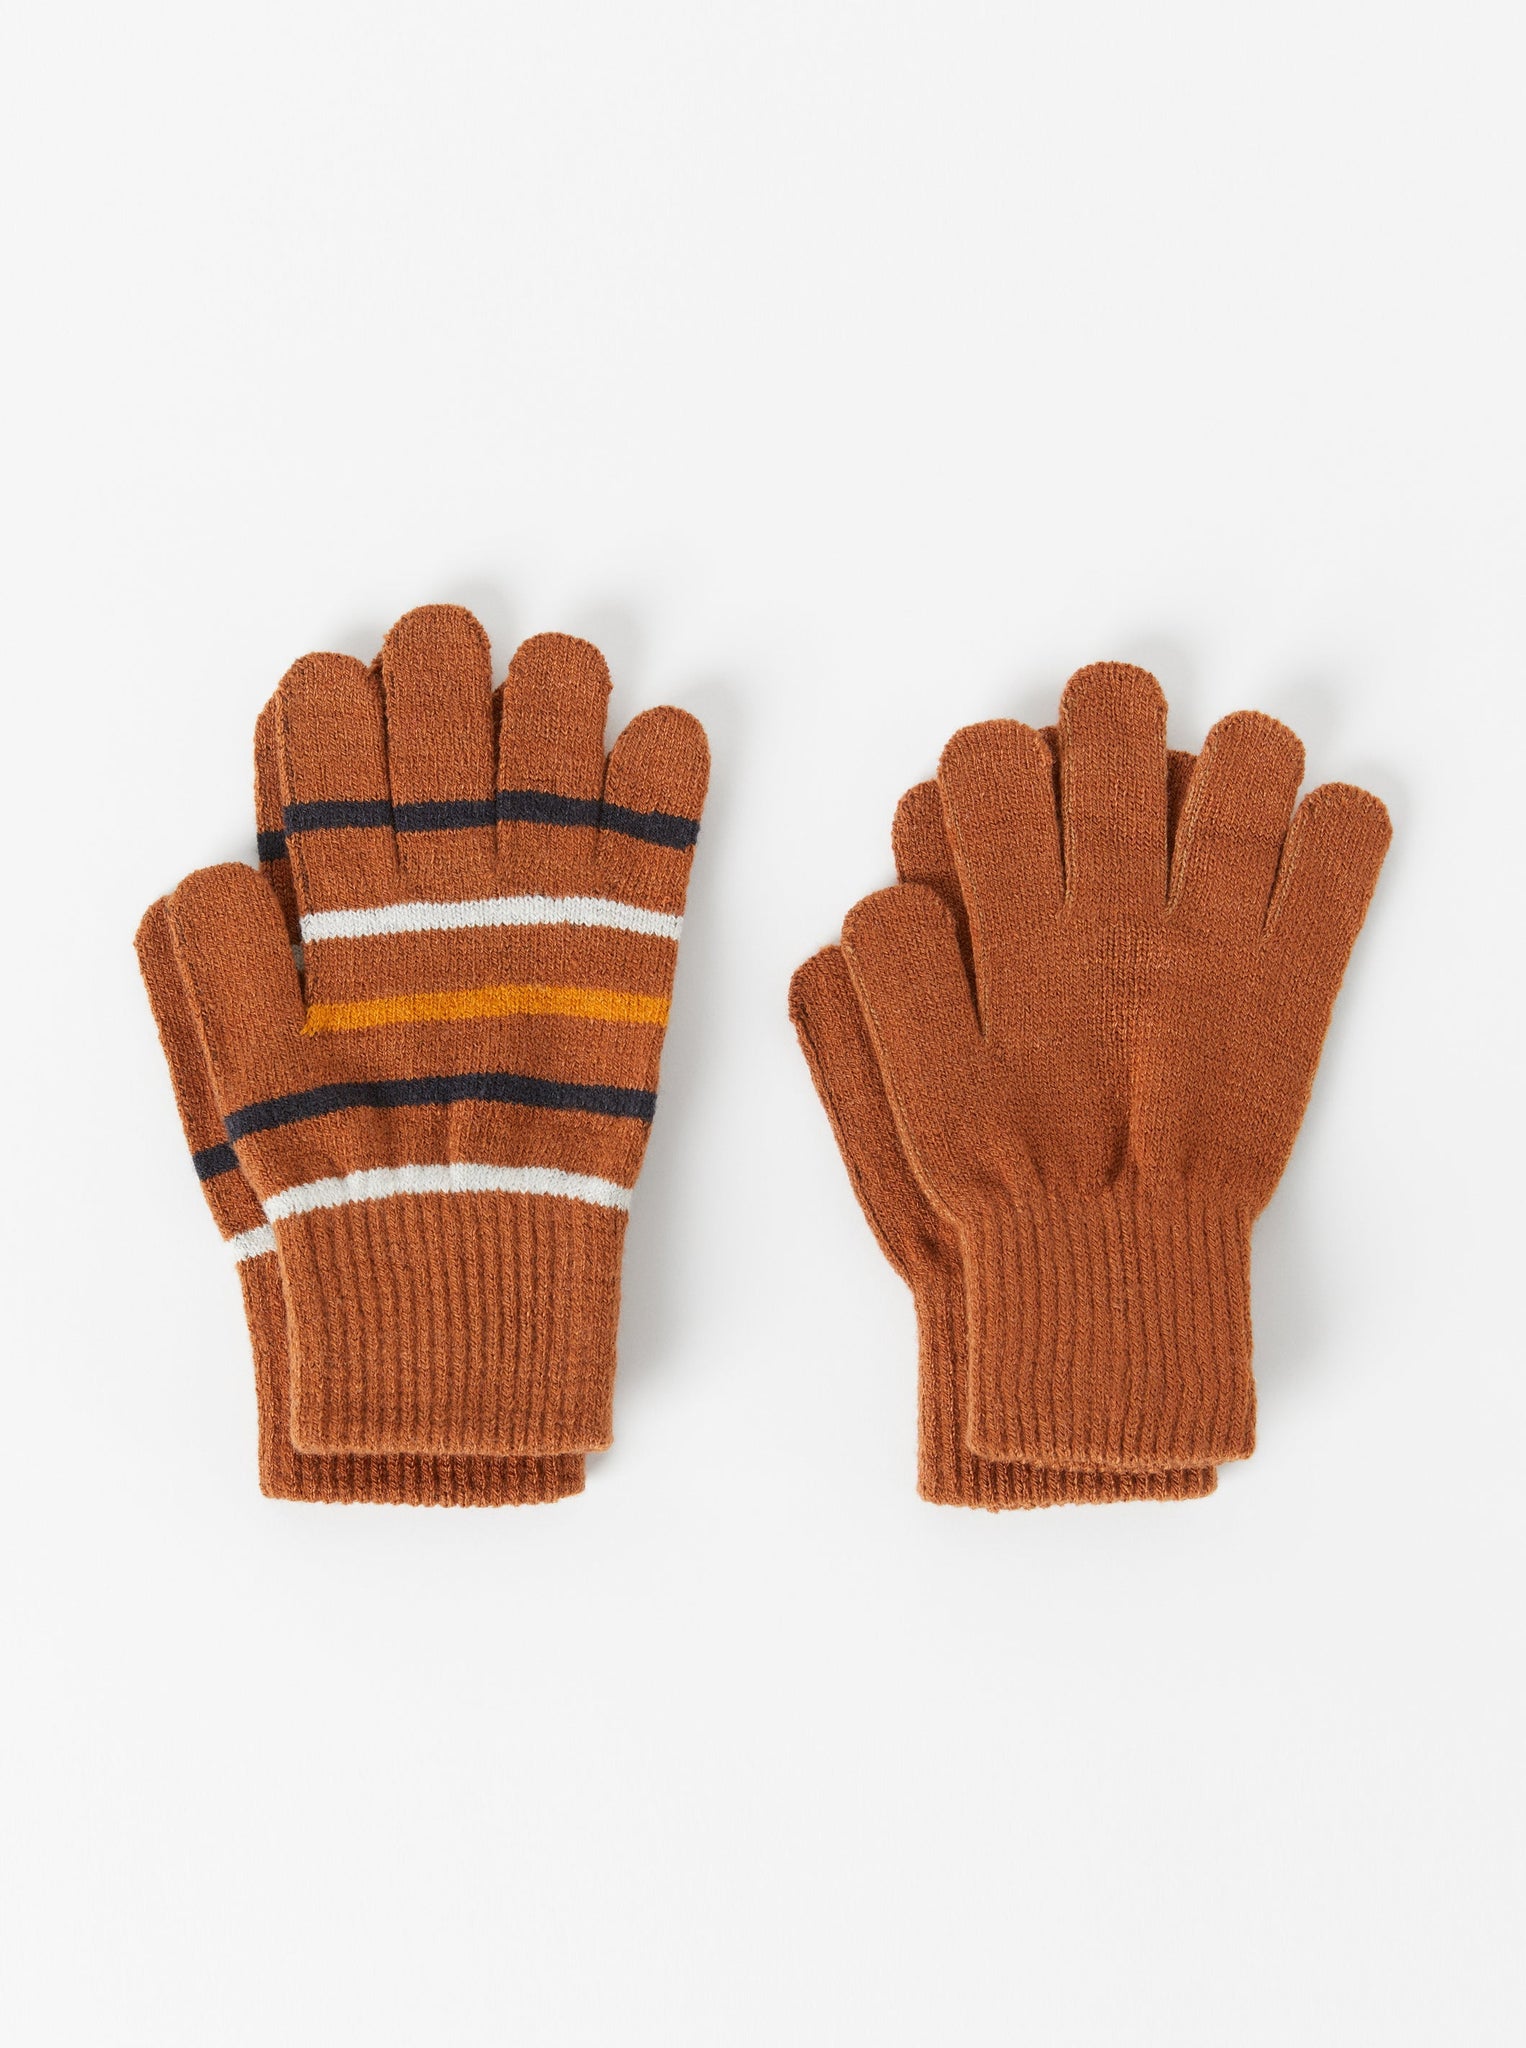 Orange Magic Kids Gloves Multipack from the Polarn O. Pyret kidswear collection. Made using ethically sourced materials.